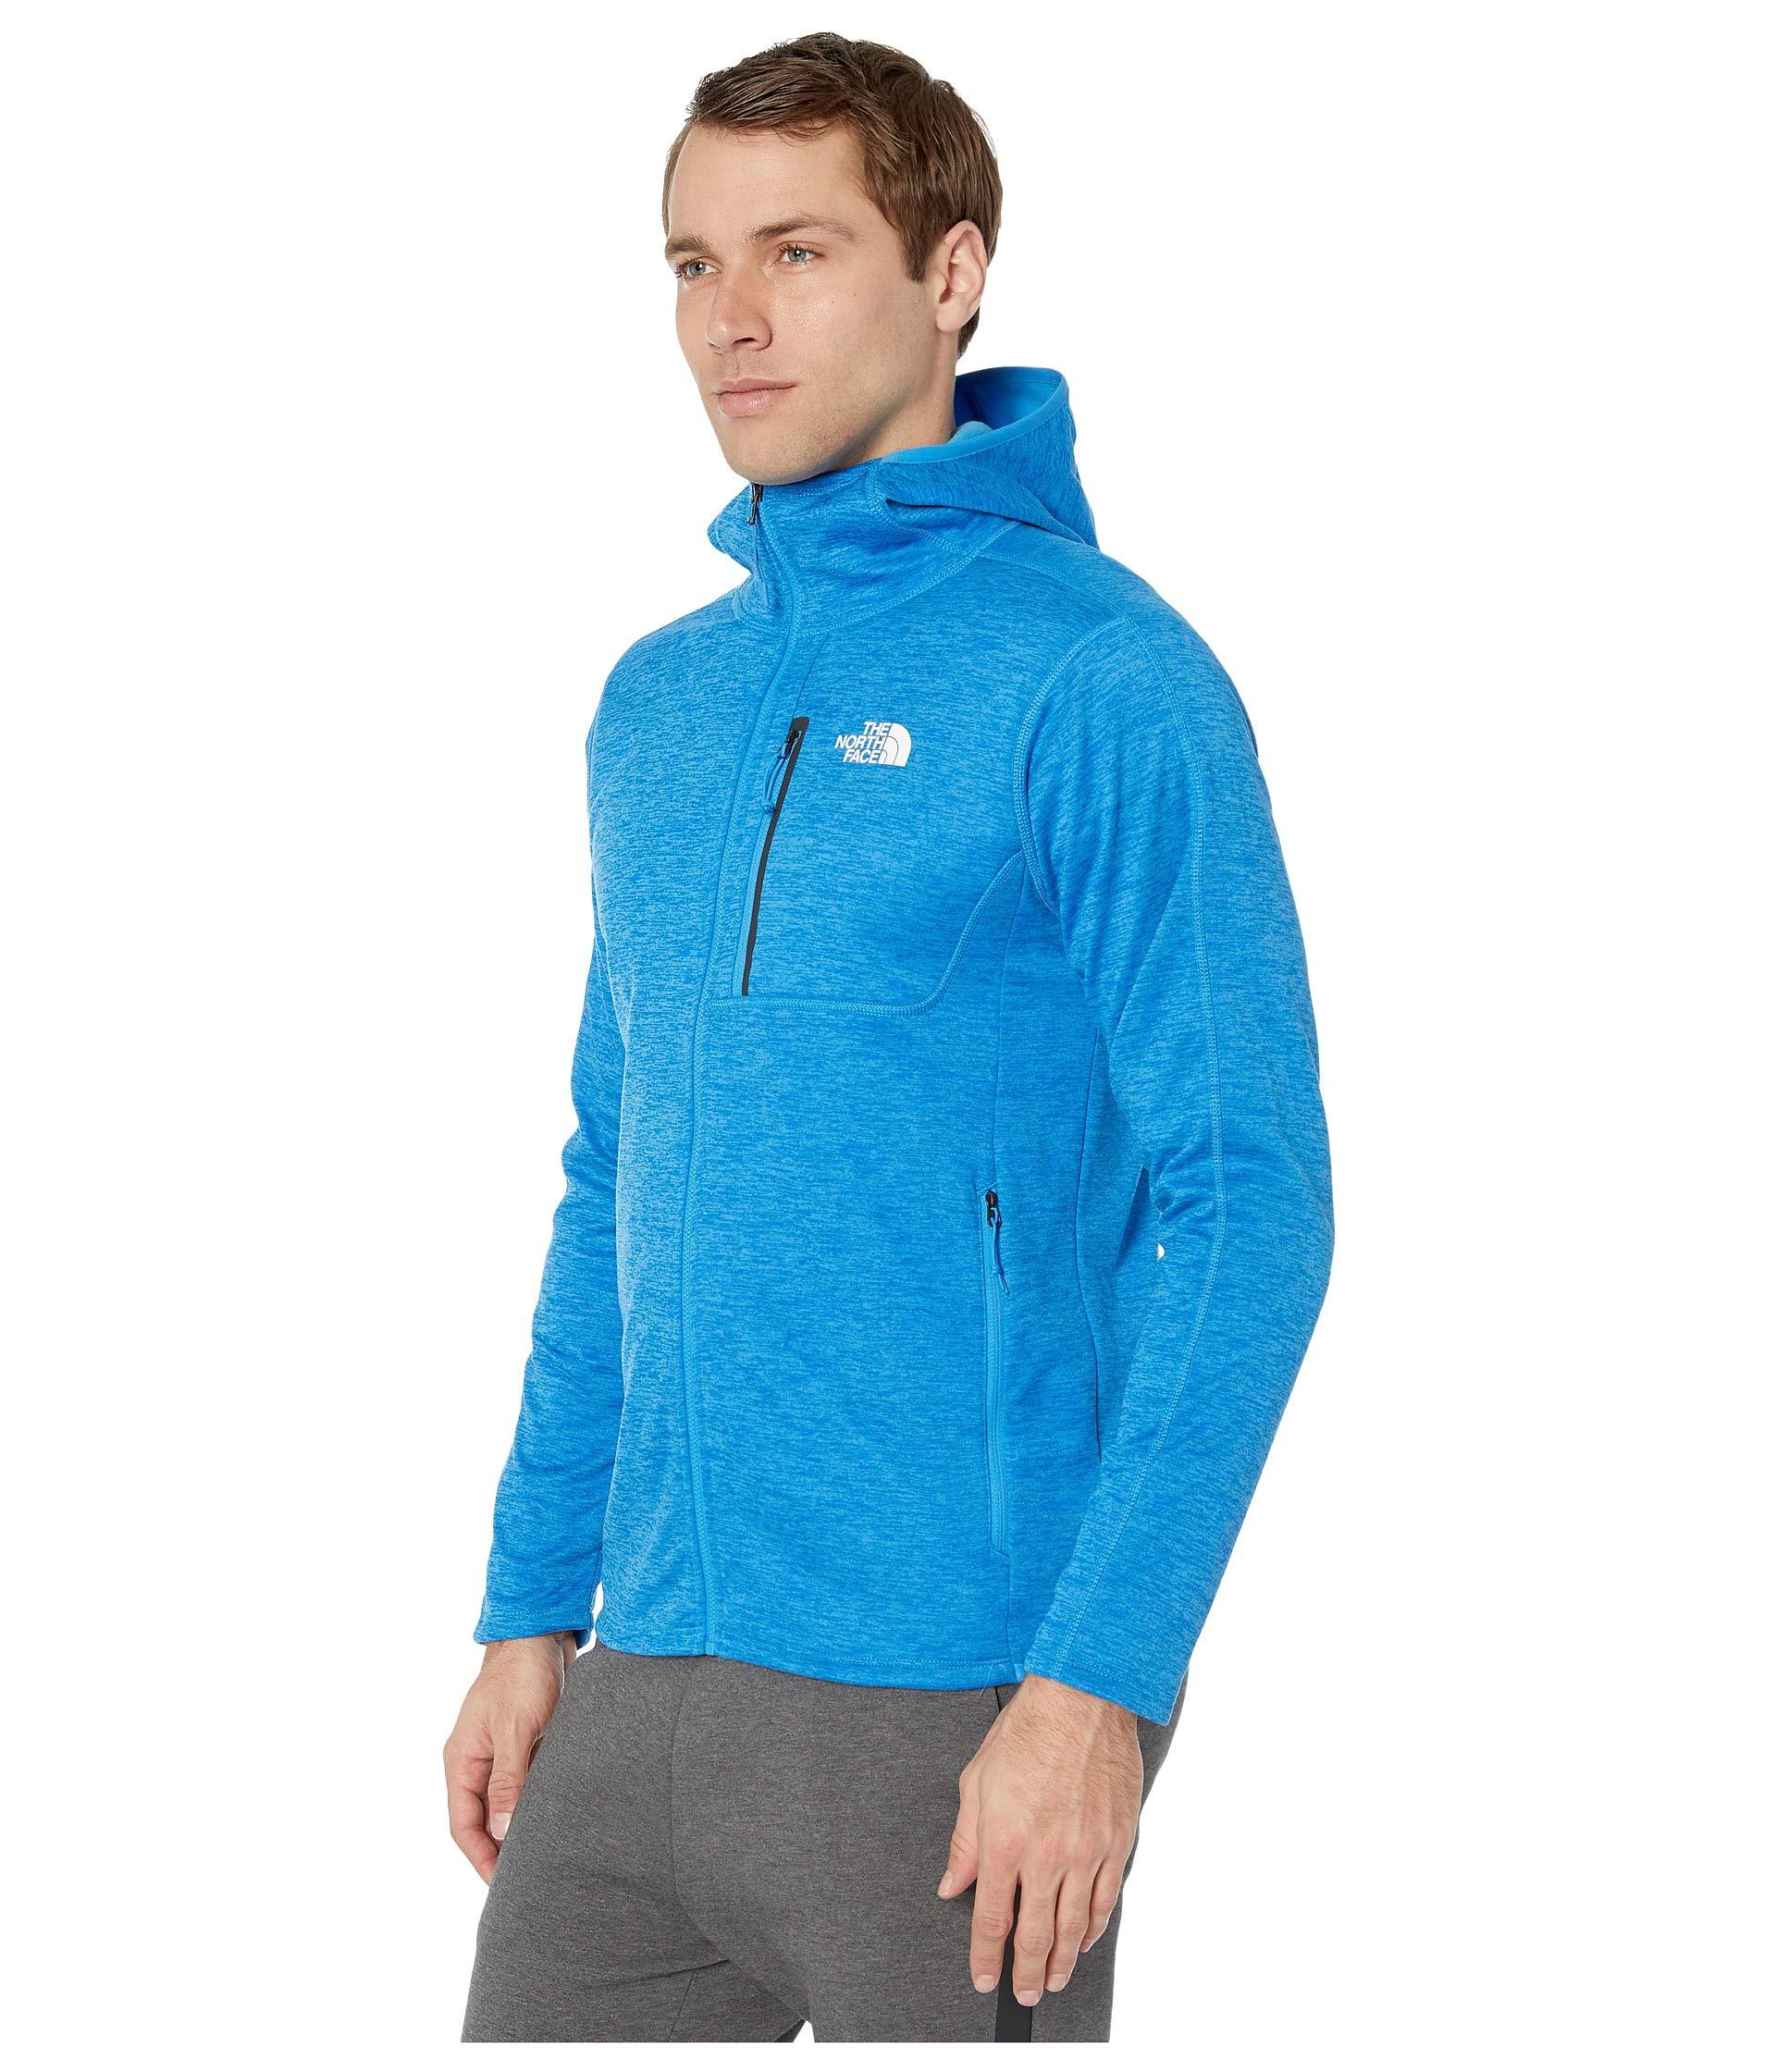 The North Face Fleece Canyonlands Hoodie in Blue for Men - Lyst